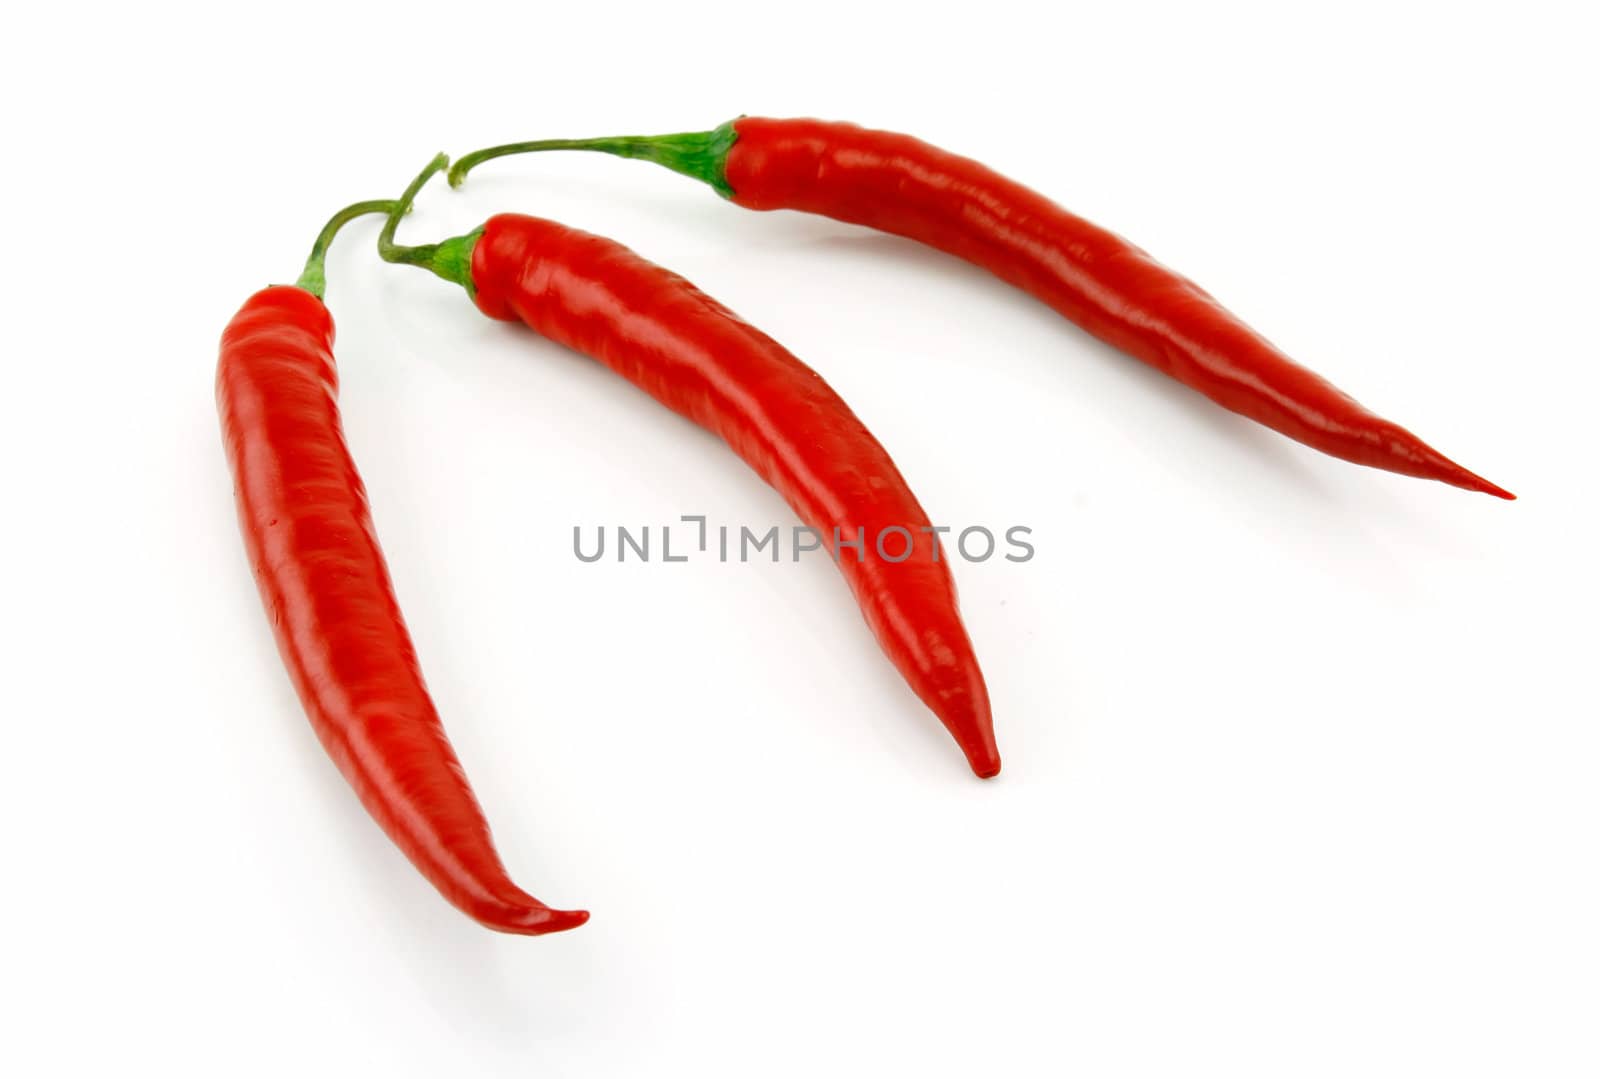 Red Chili Pepper Isolated on White Background